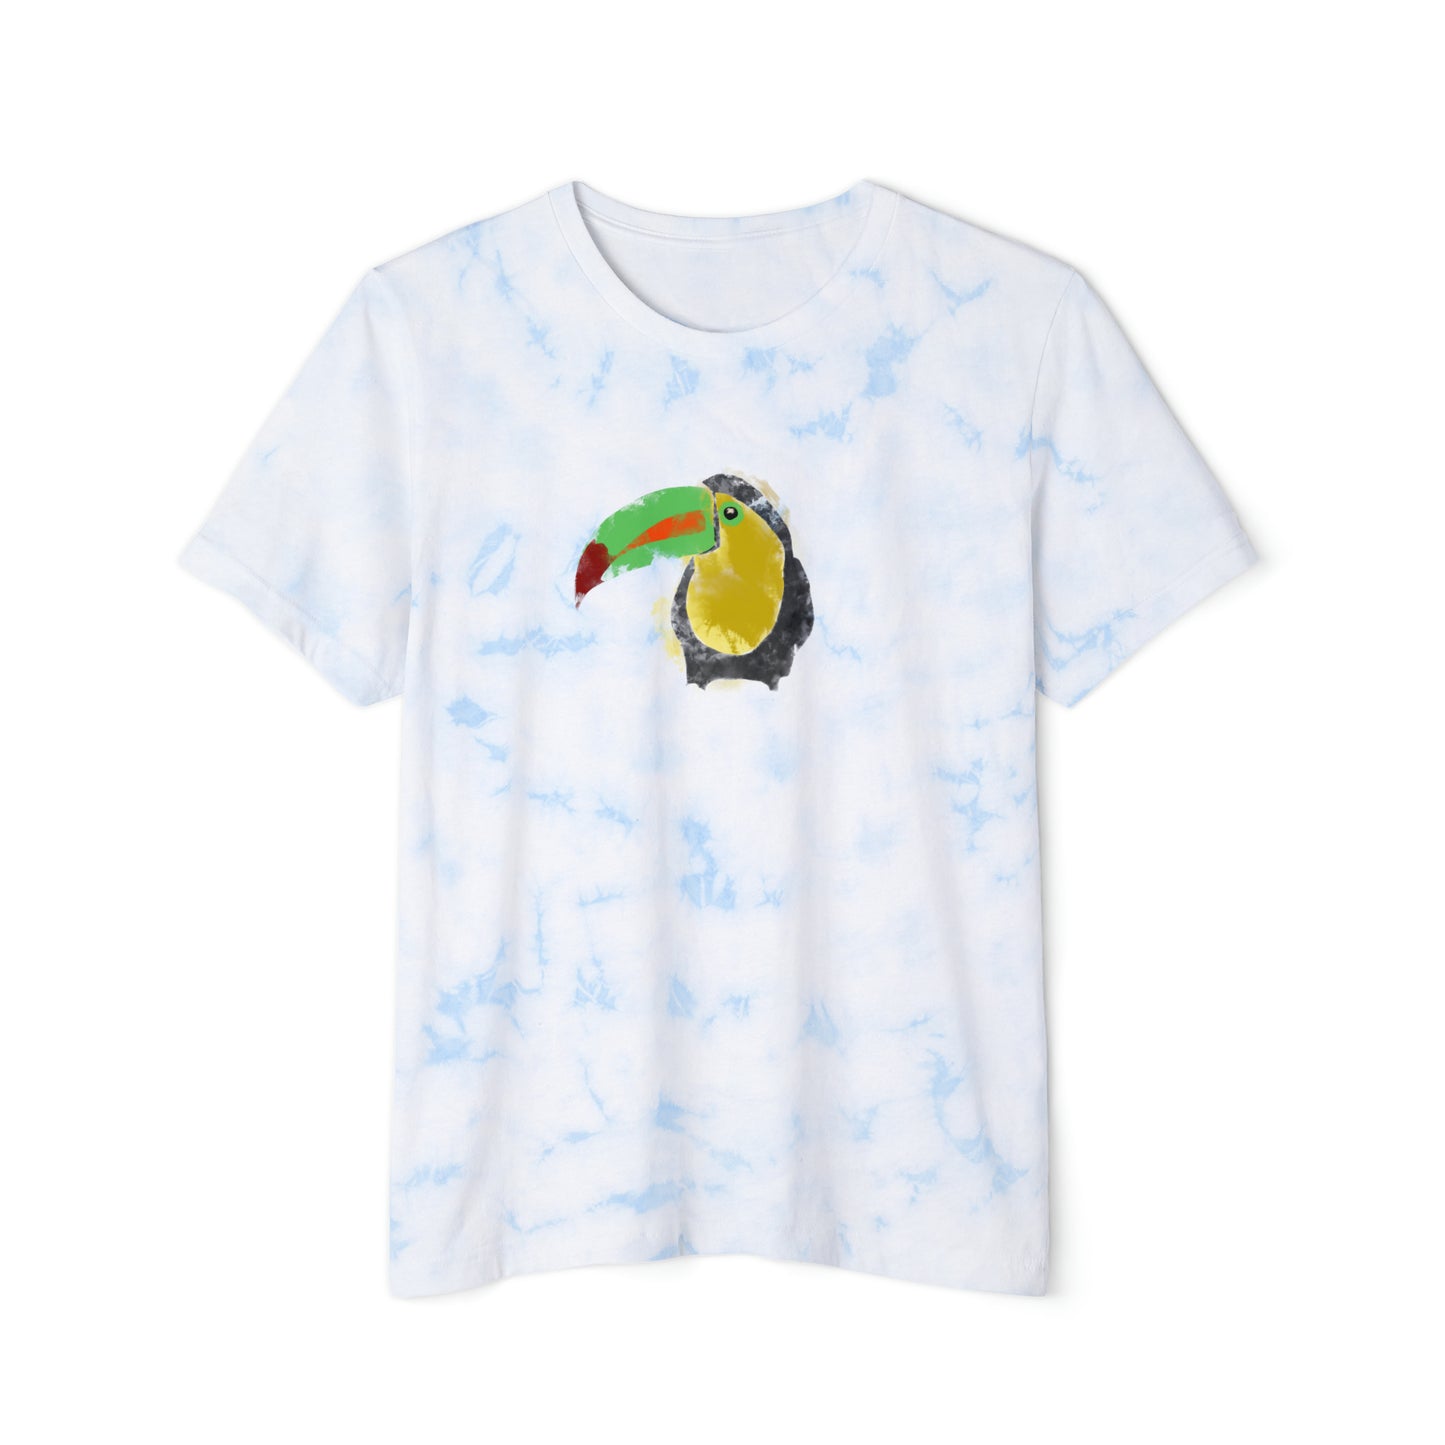 Toucan, Unisex FWD Fashion Tie-Dyed T-Shirt